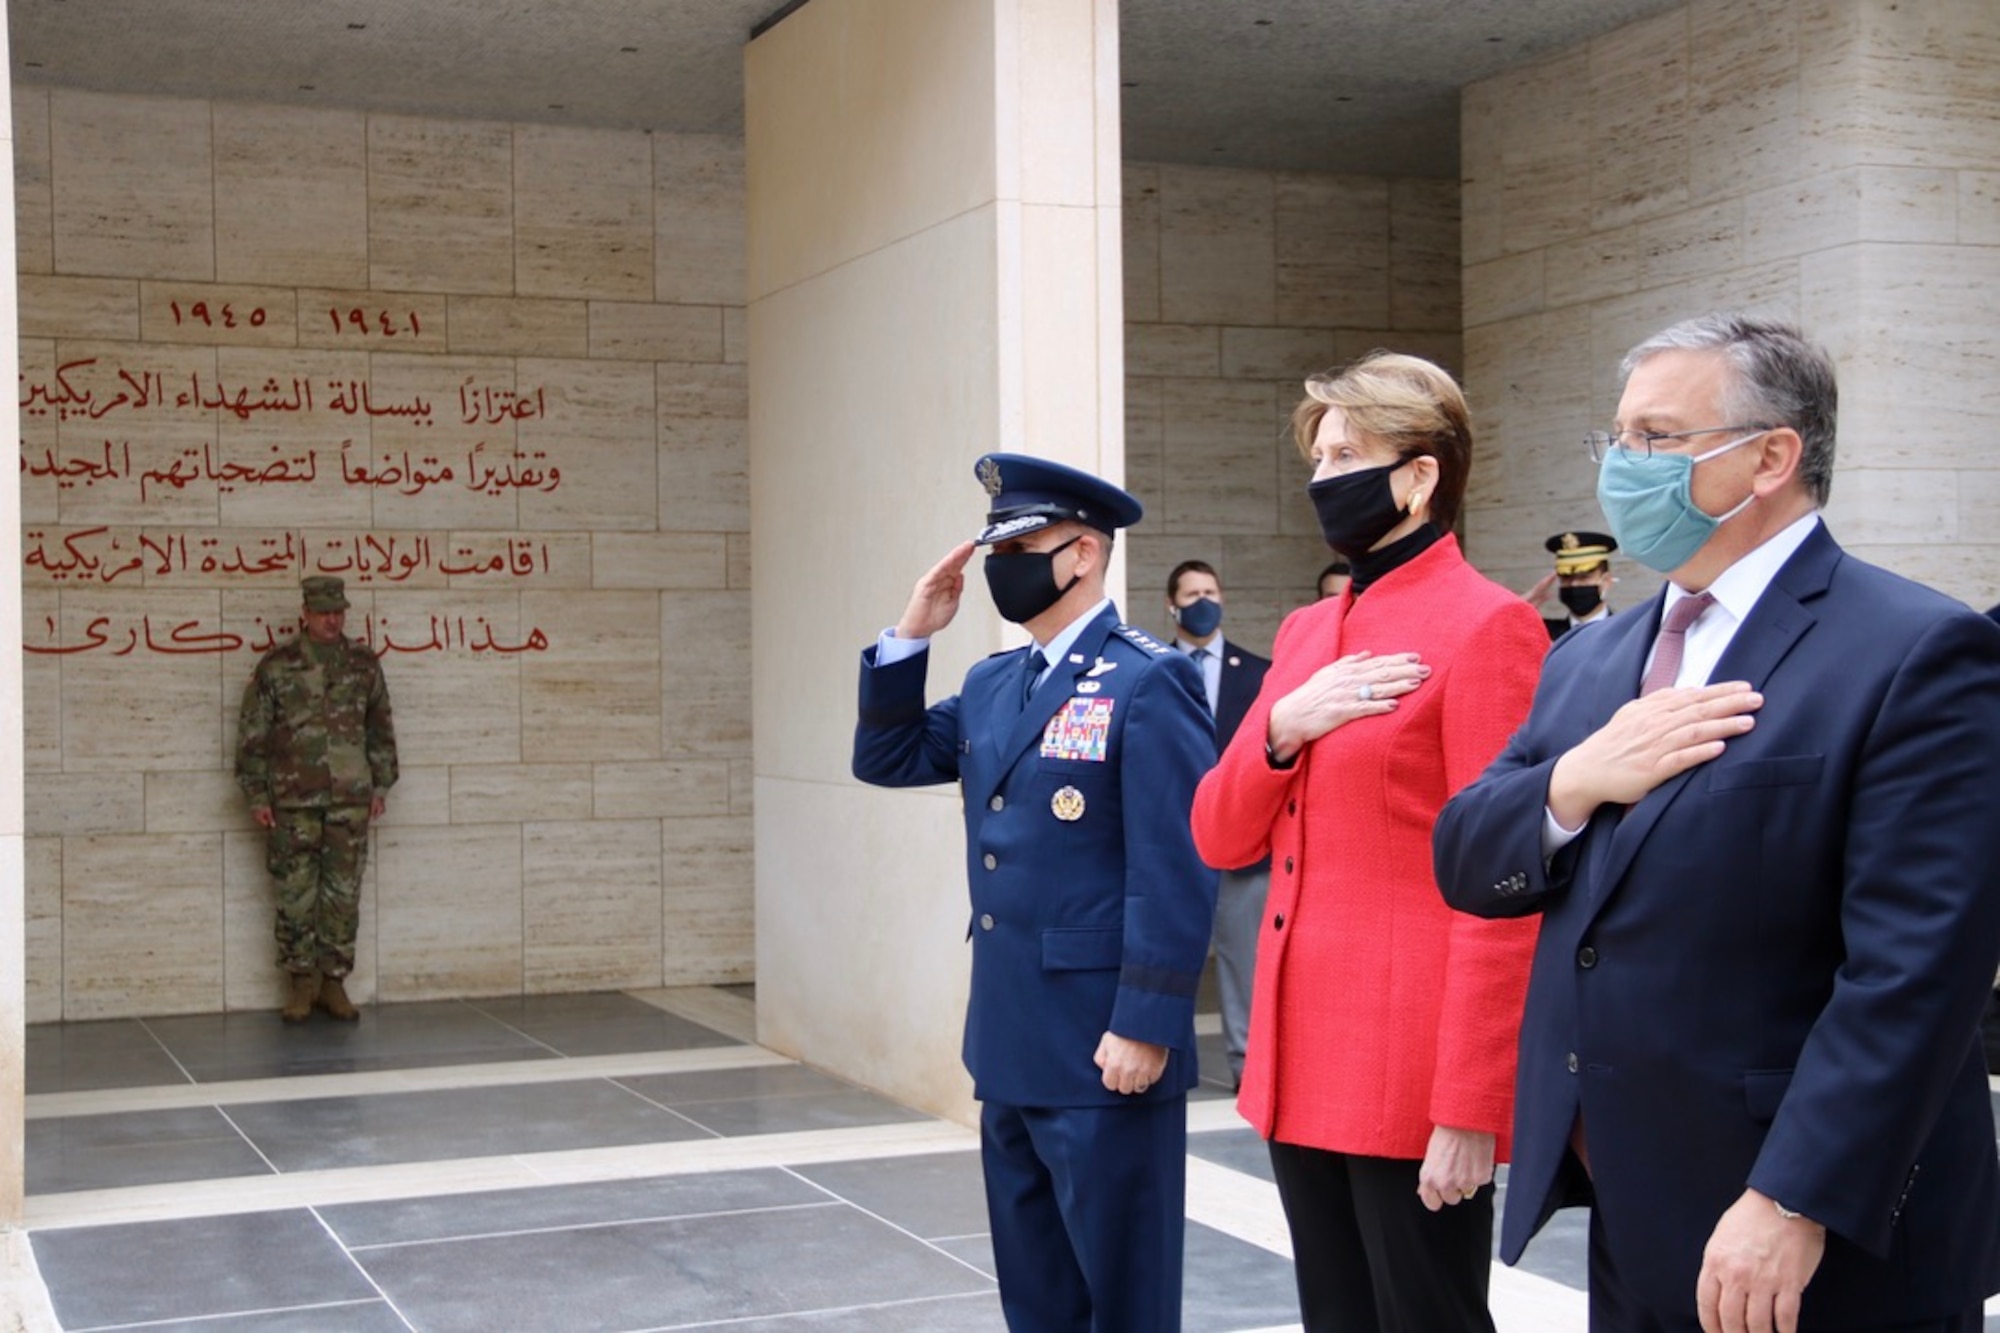 Gen. Jeff Harrigian, U.S. Air Forces in Europe and Air Forces Africa commander, Barbara Barrett, Secretary and the Air Force, and Donald Blome, U.S. Ambassador to Tunisia, attend a ceremony at the North Africa American Cemetery, Tunisia, Jan. 6, 2020. Harrigian visited various locations in North Africa to reaffirm the U.S. military's commitment to the region. (U.S. Embassy Tunis courtesy photo)